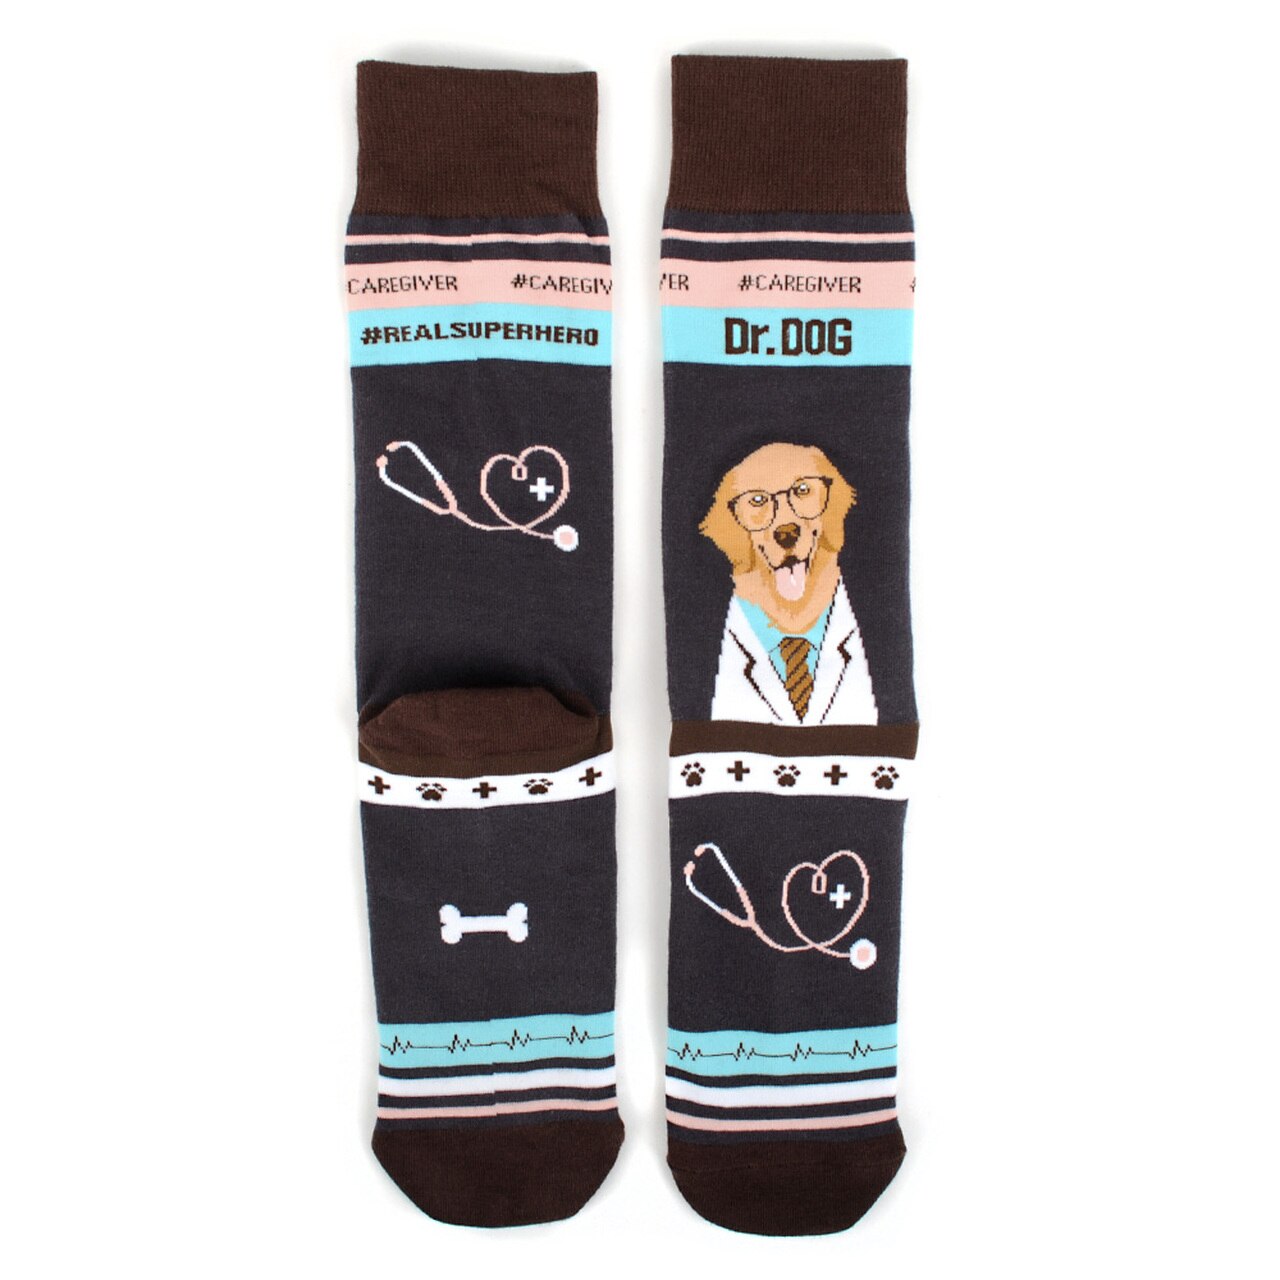 MashasCorner.com   Health Care Heroes -Dr. Dog- Ultra Premium Novelty Socks  Material: 68% cotton, 29% polyester, 3% spandex Sizes: available in S/M and L/XL S/M: men shoe size: 4.5-7.5, ladies shoe size: 5.5-9.5 L/XL: men shoe size: 8-12, ladies shoe size: 10-10.5 Unisex style